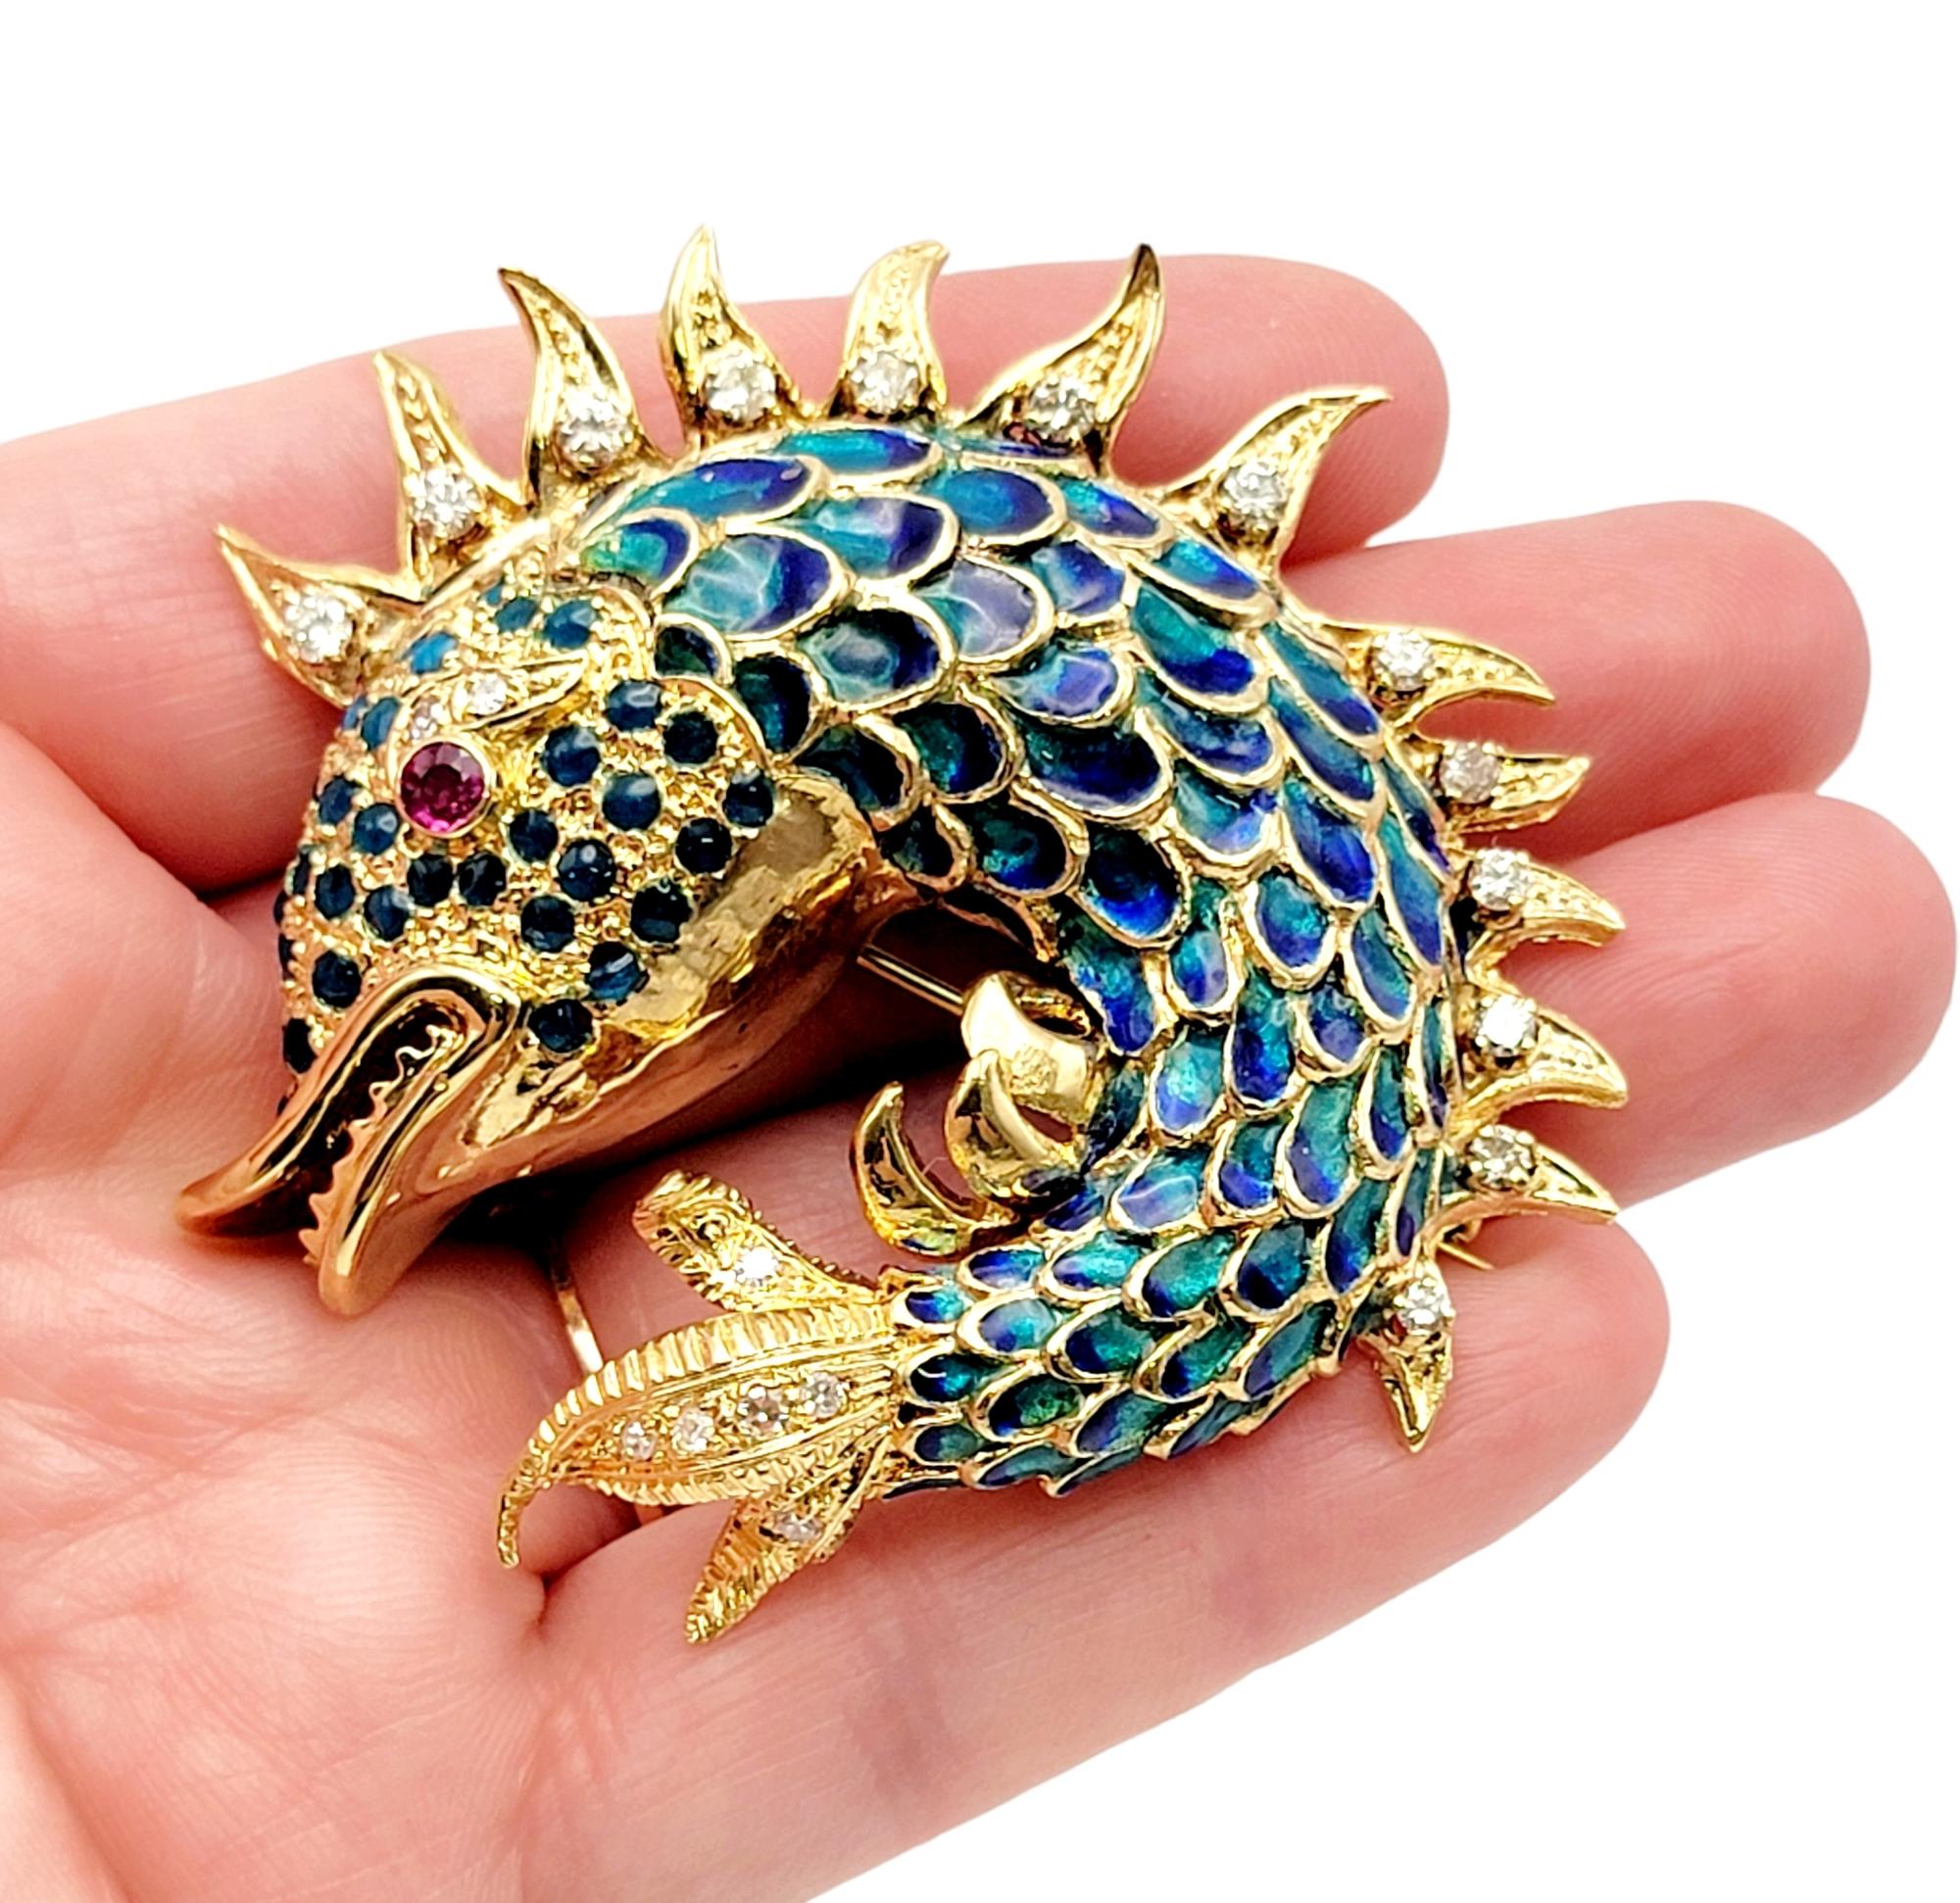 Ornate Scaled 14 Karat Yellow Gold Fish Brooch with Diamonds, Ruby and Enamel  1